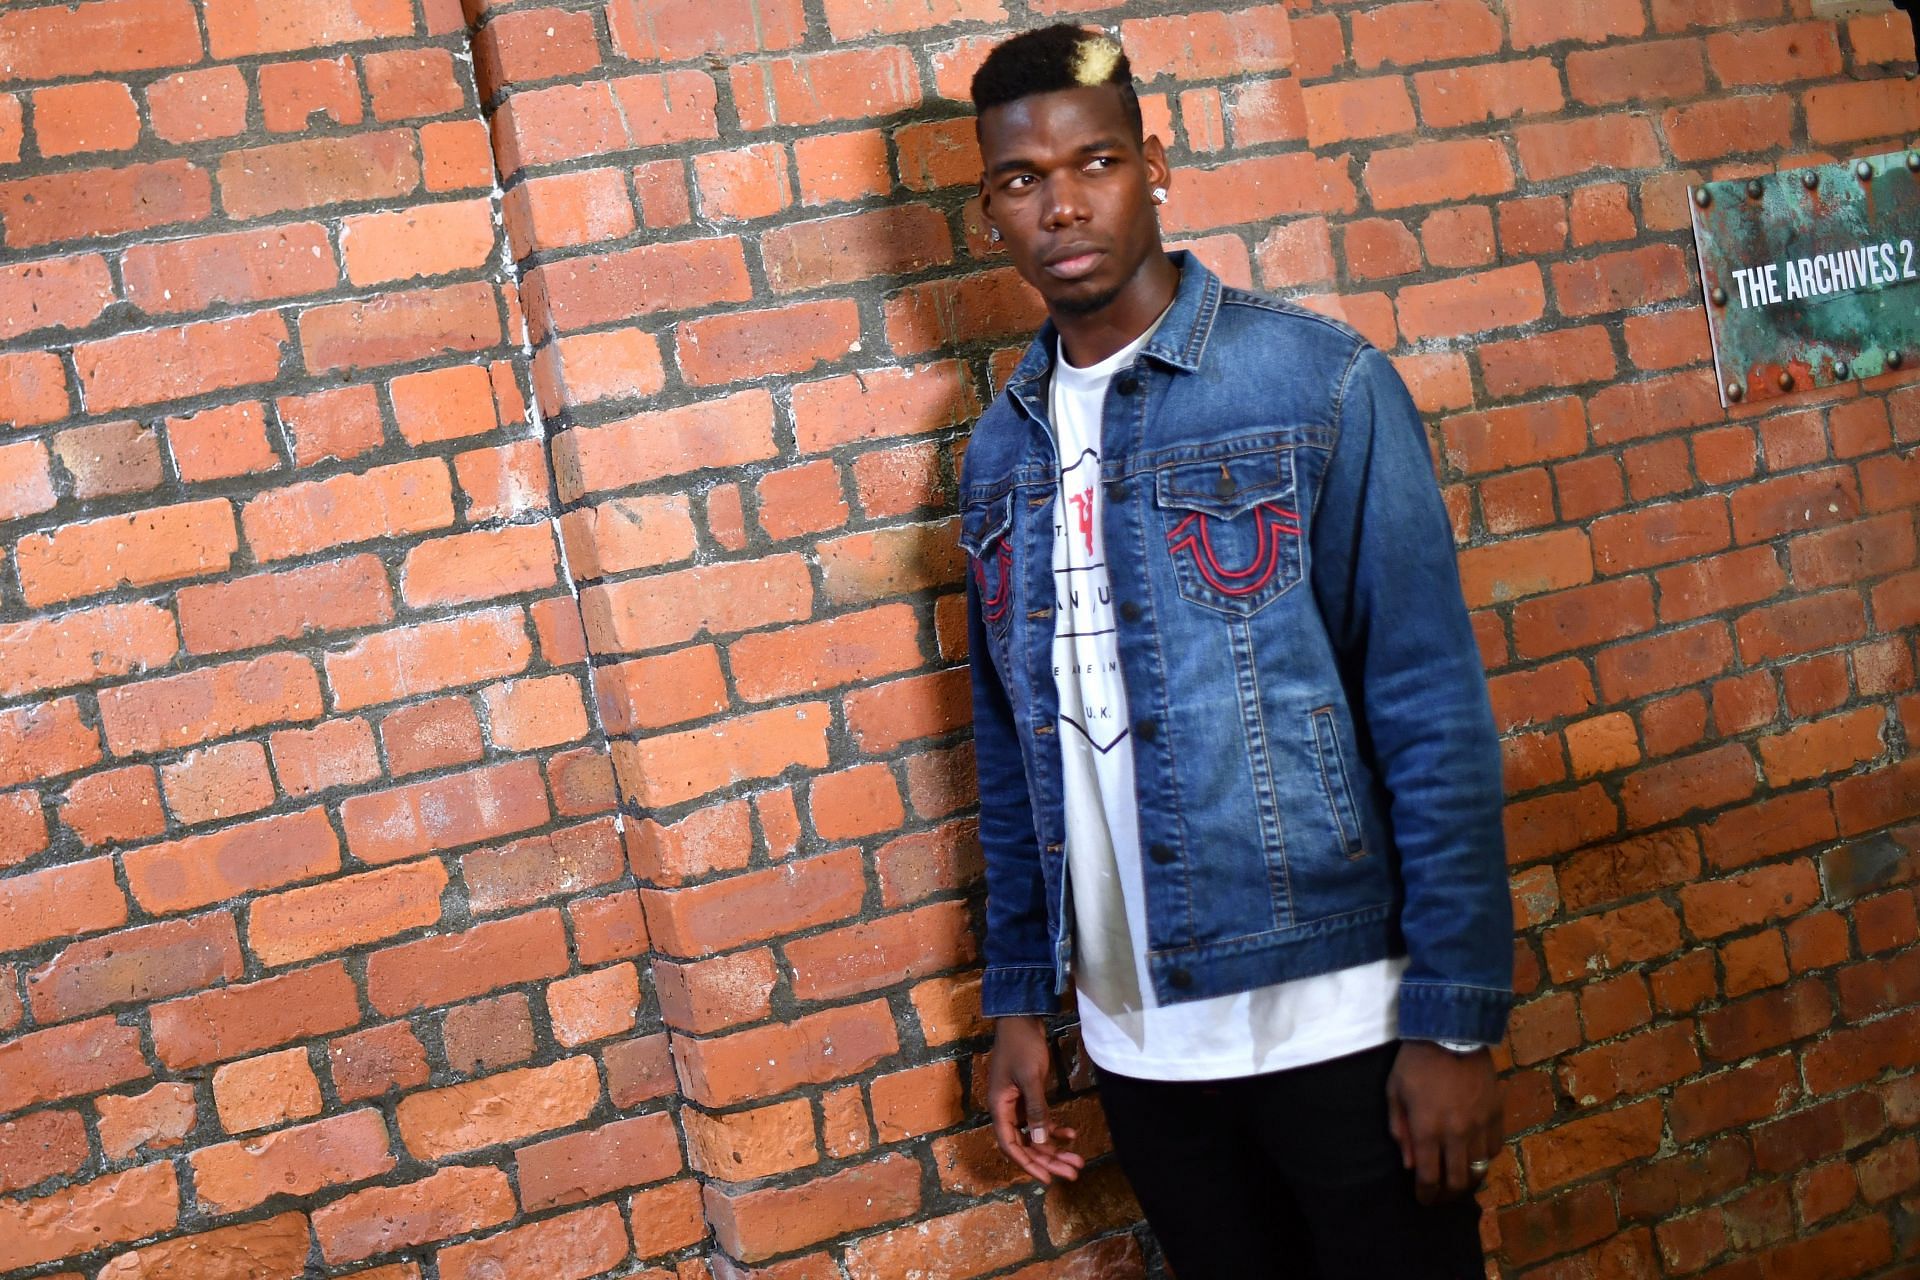 Paul Pogba, a soccer star, was affiliated with True Religion as well.